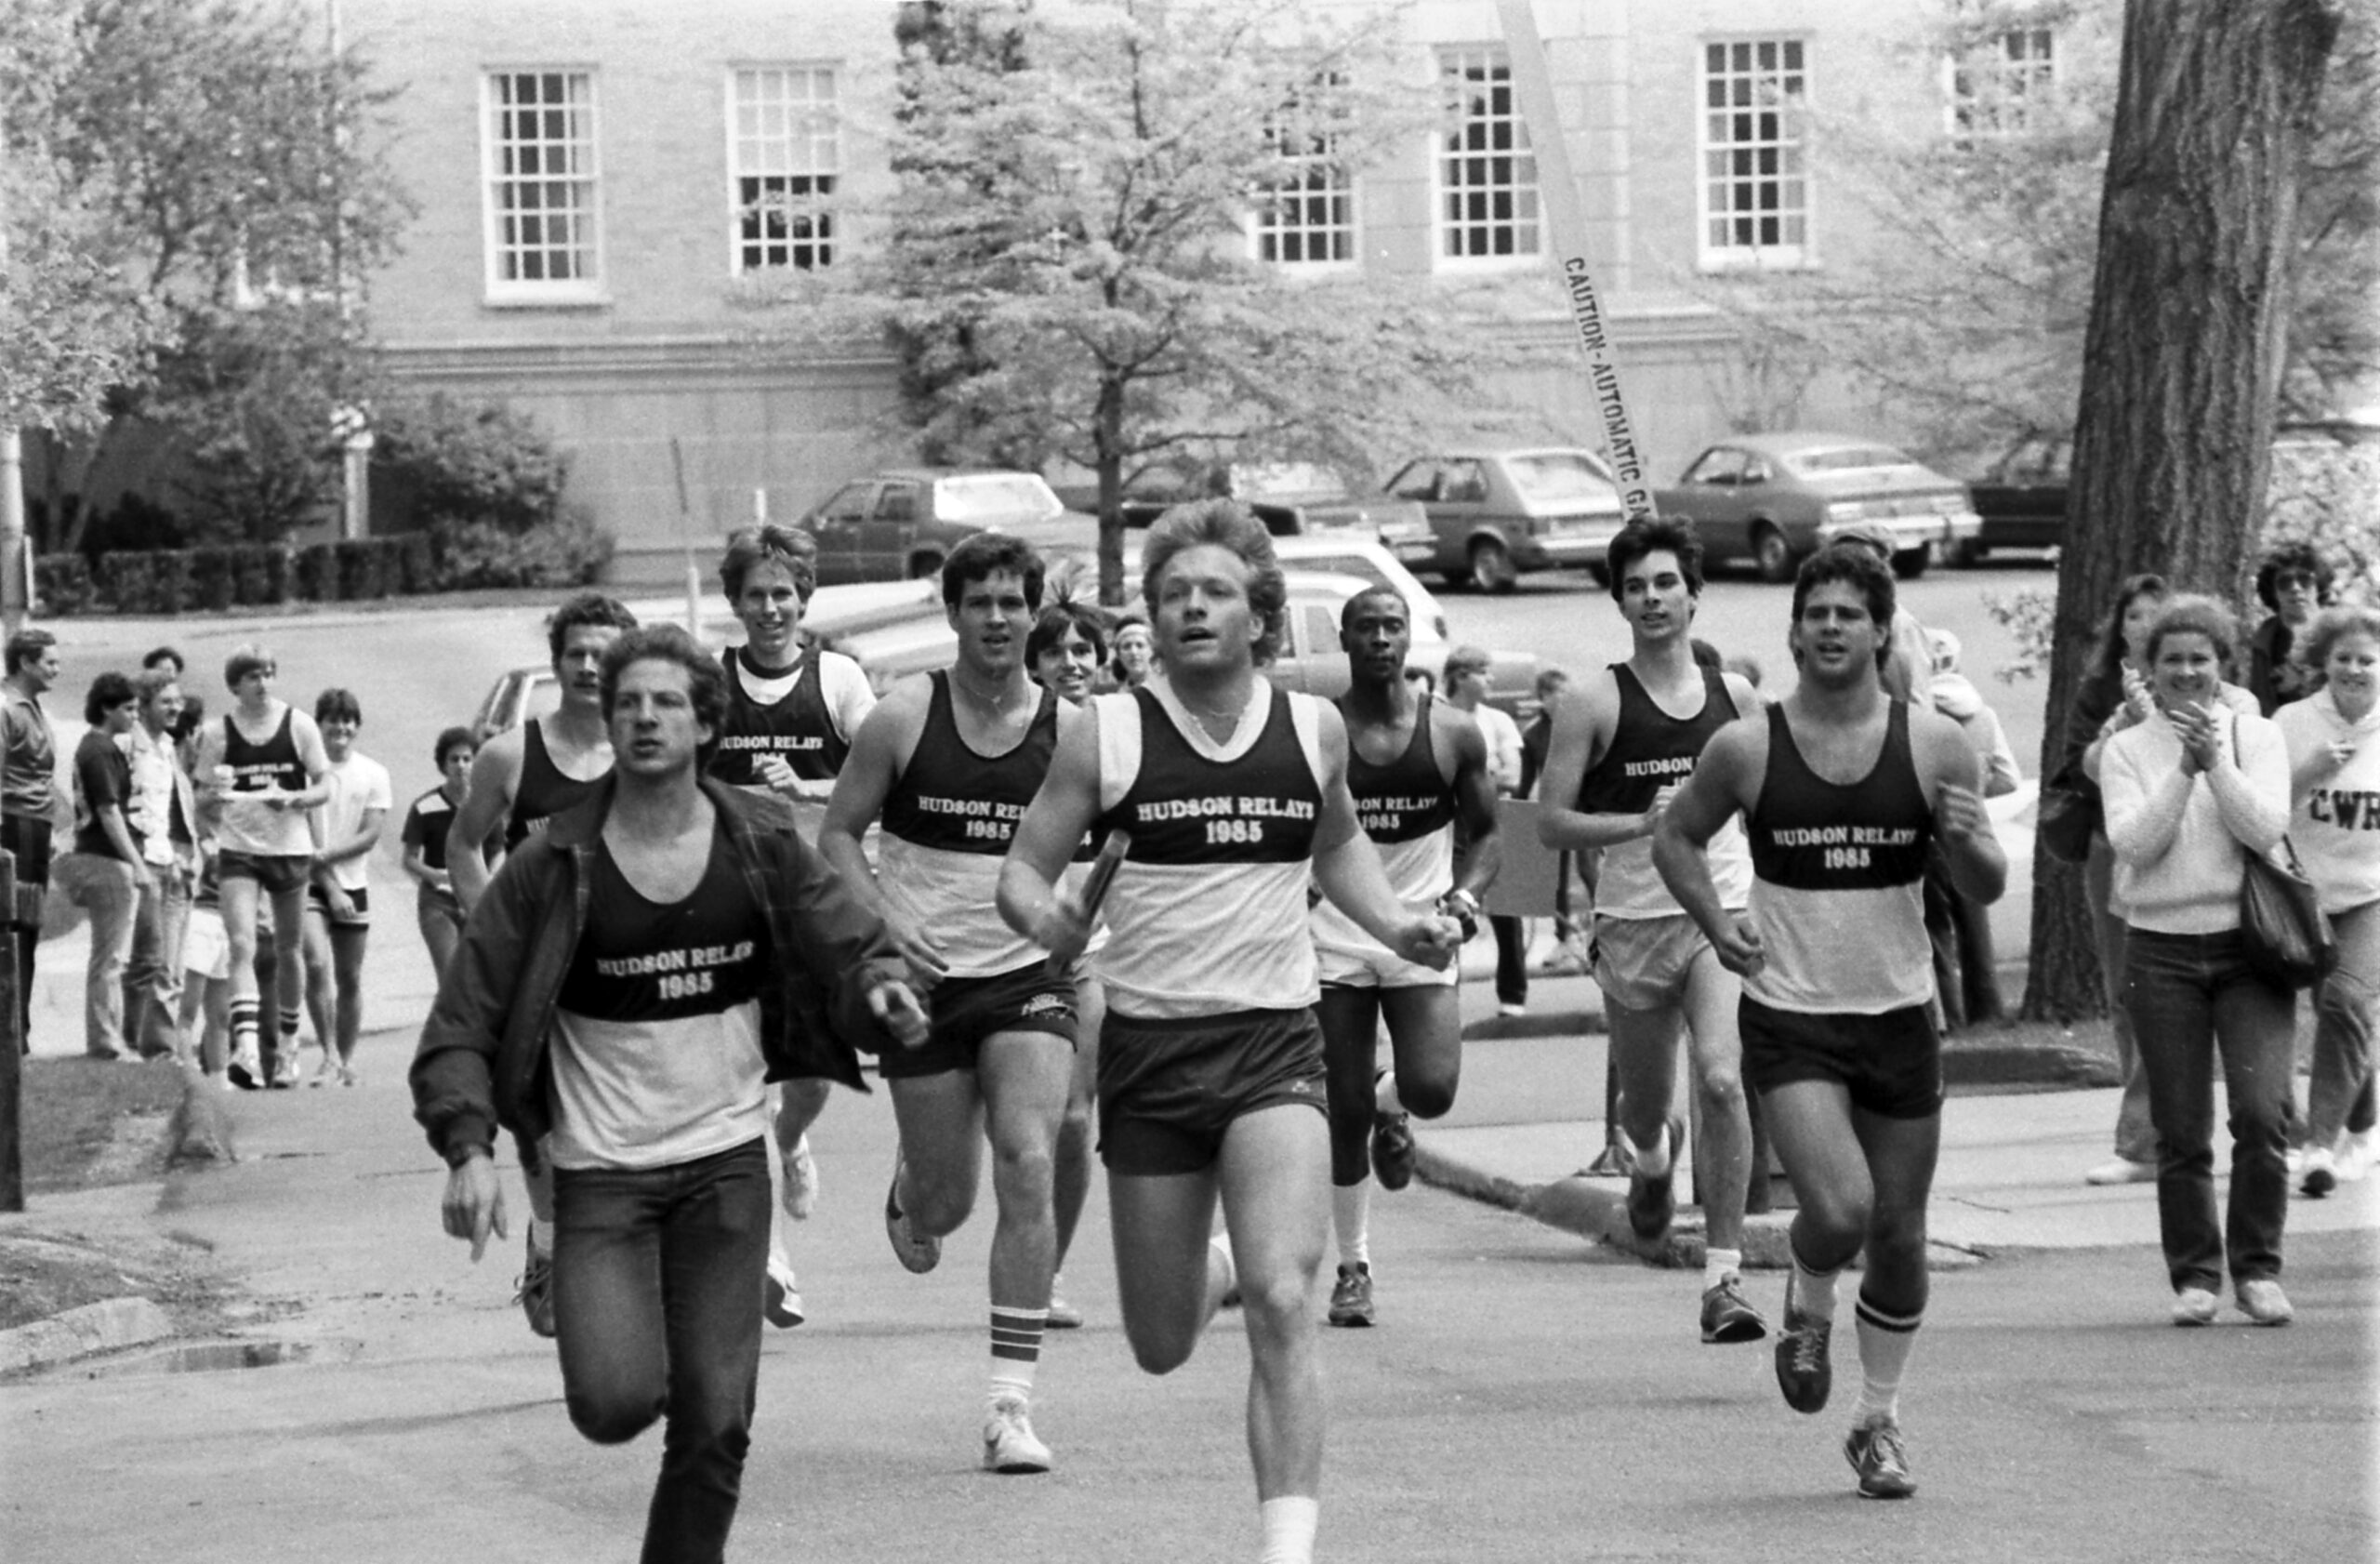 Hudson Relay winners near the end of the race, 1985